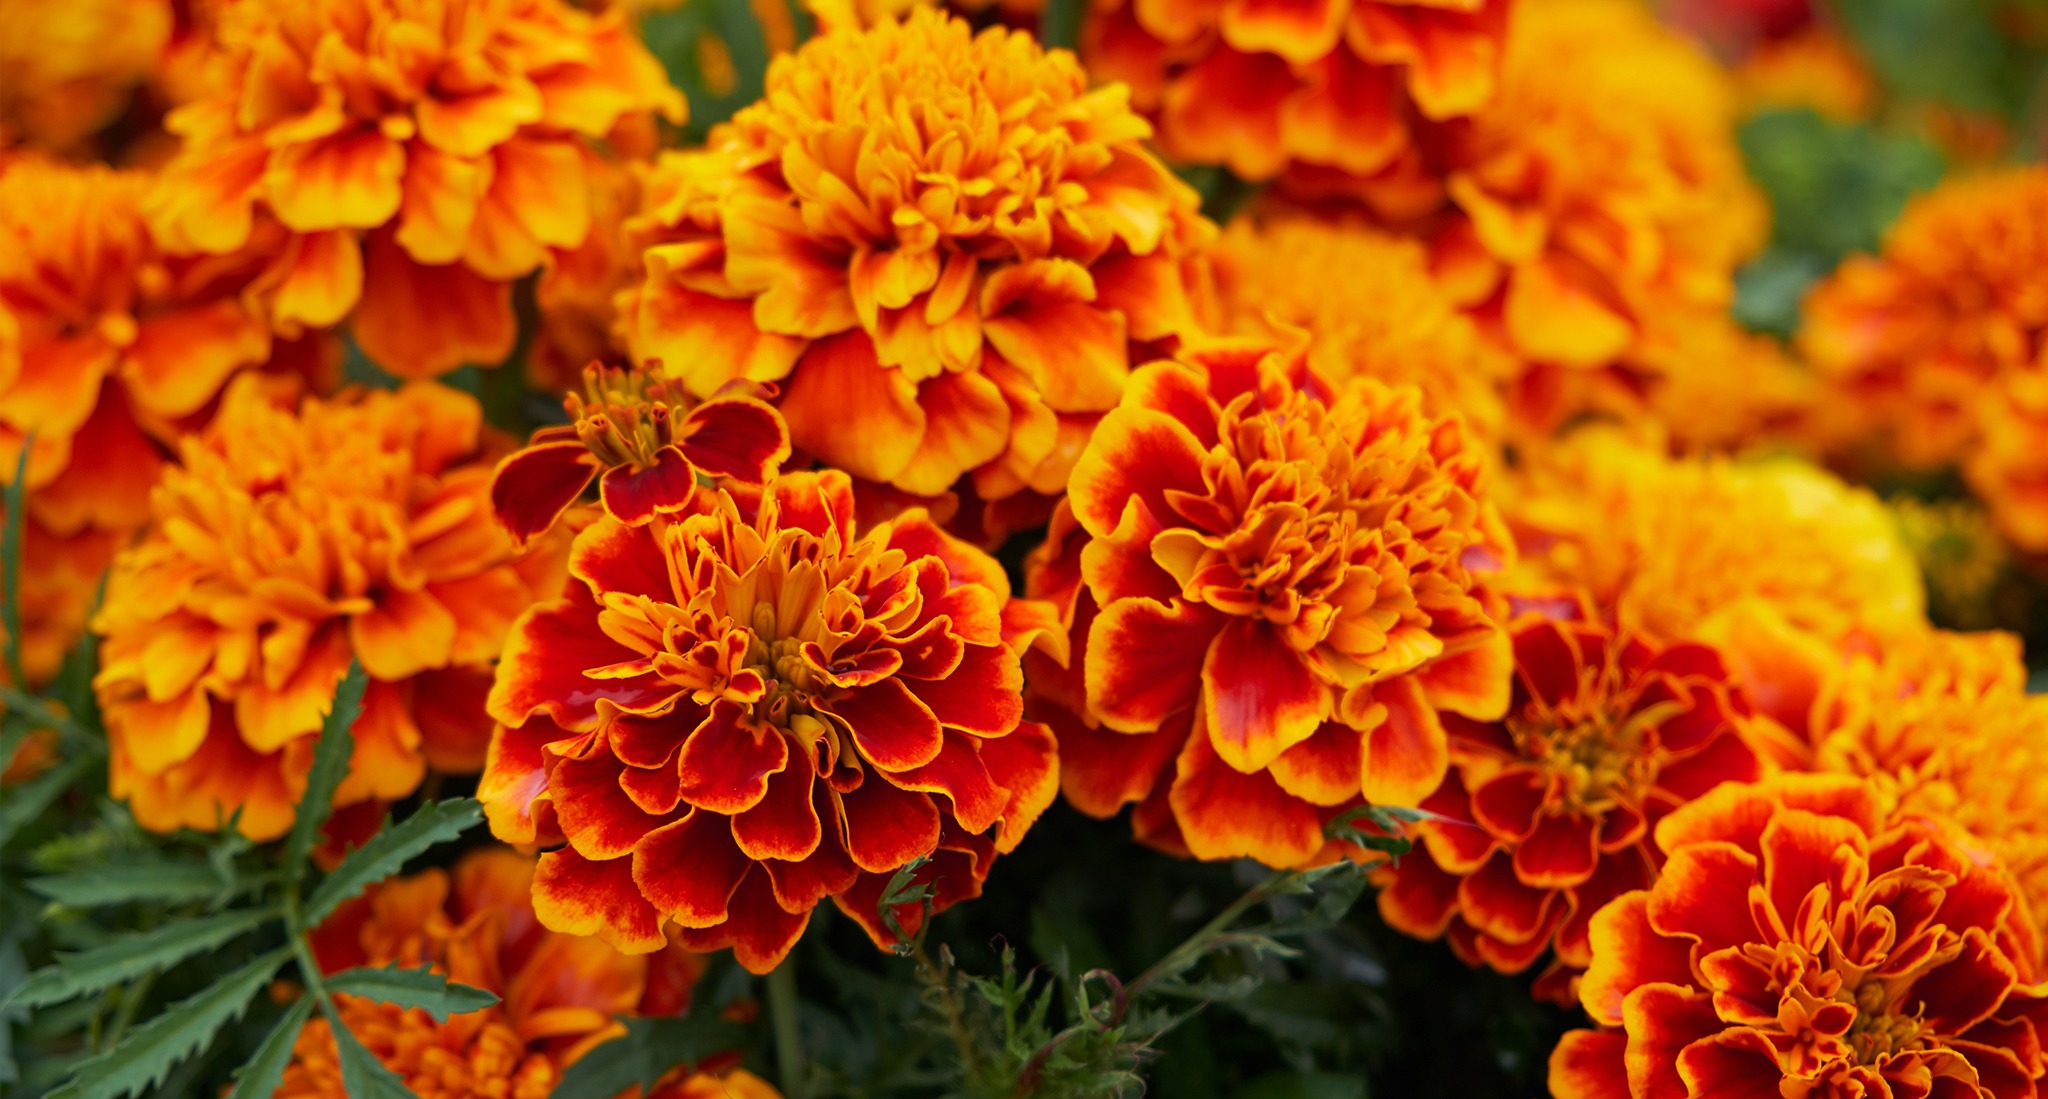 Marigold or Calendula flowers are the source of our products